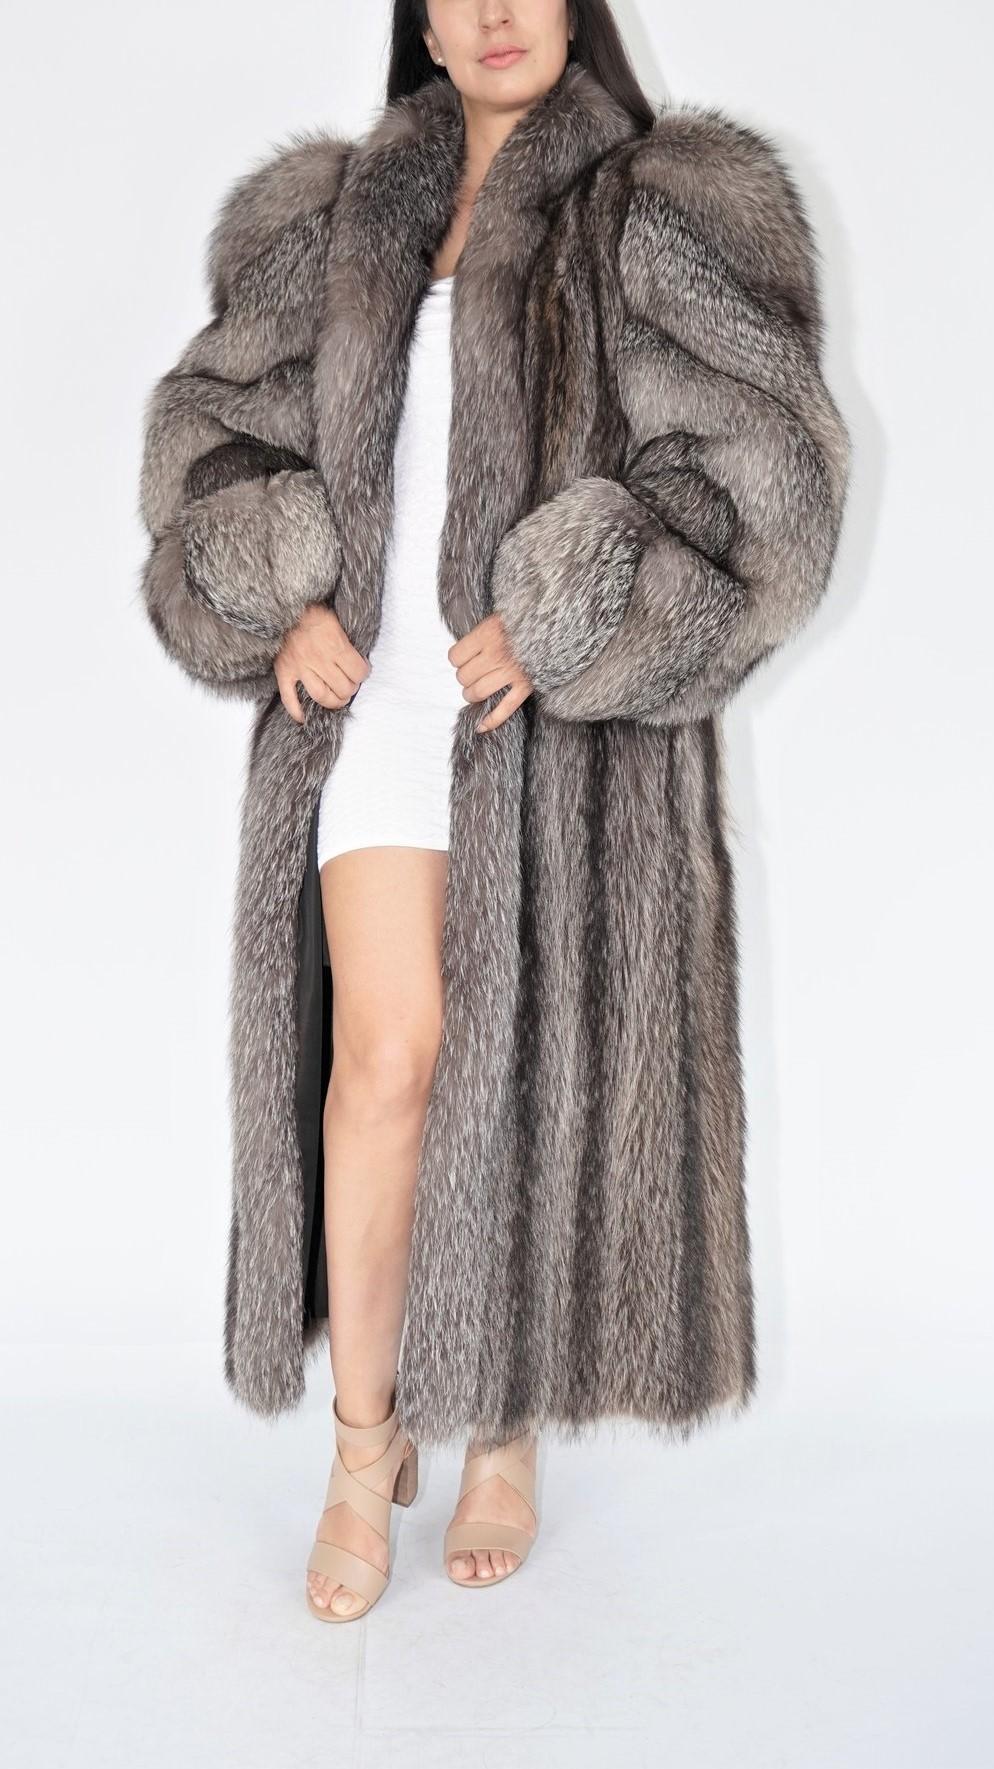 Raccoon fur coat with silver fox trim and sleeves size 8-10 In Excellent Condition For Sale In Montreal, Quebec